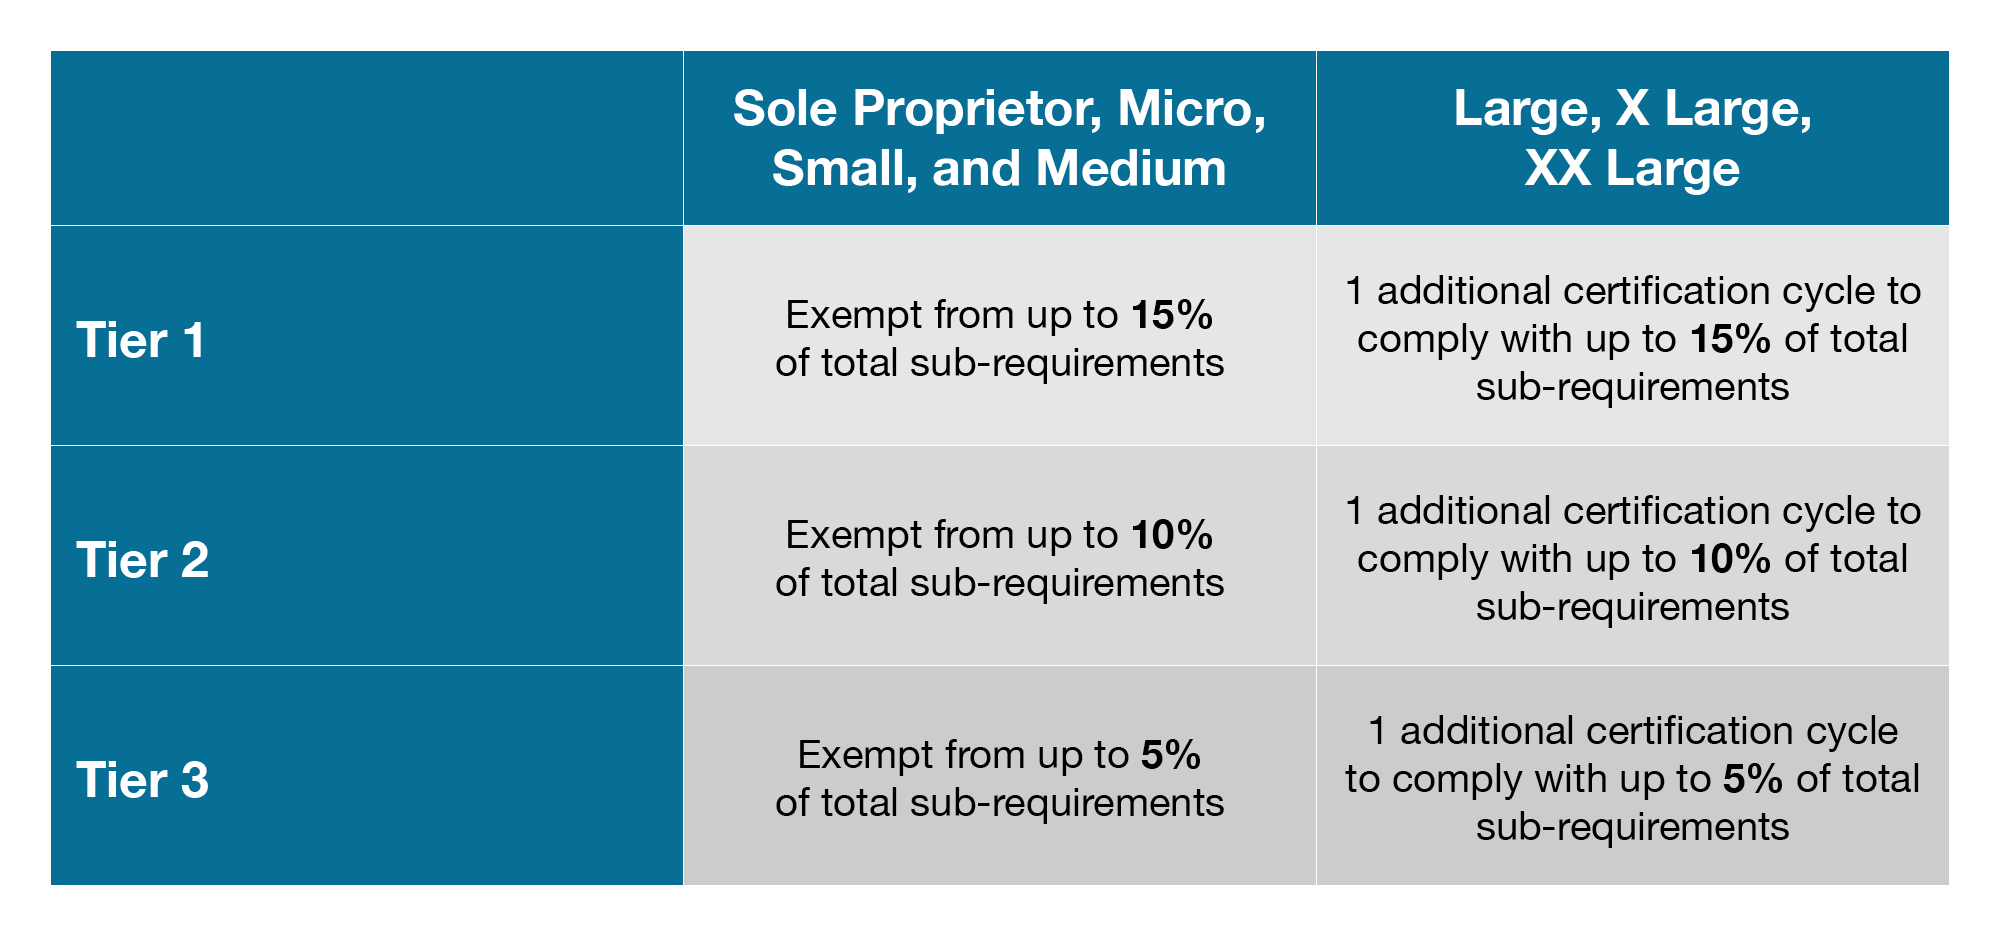 For sole proprietor, micro, small, and medium companies, Tier 1, exempt from up to 15% of total sub-requirements. Tier 2, exempt from up to 10% of total sub-requirements. Tier 3, exempt from up to 5% of total sub-requirements. For large, X large, XX large, Tier 1, 1 additional certification cycle to comply with up to 15% of total sub-requirements. Tier 2, 1 additional certification cycle to comply with up to 10% of total sub-requirements. Tier 3, 1 additional certification cycle to comply with up to 5% of total sub-requirements.